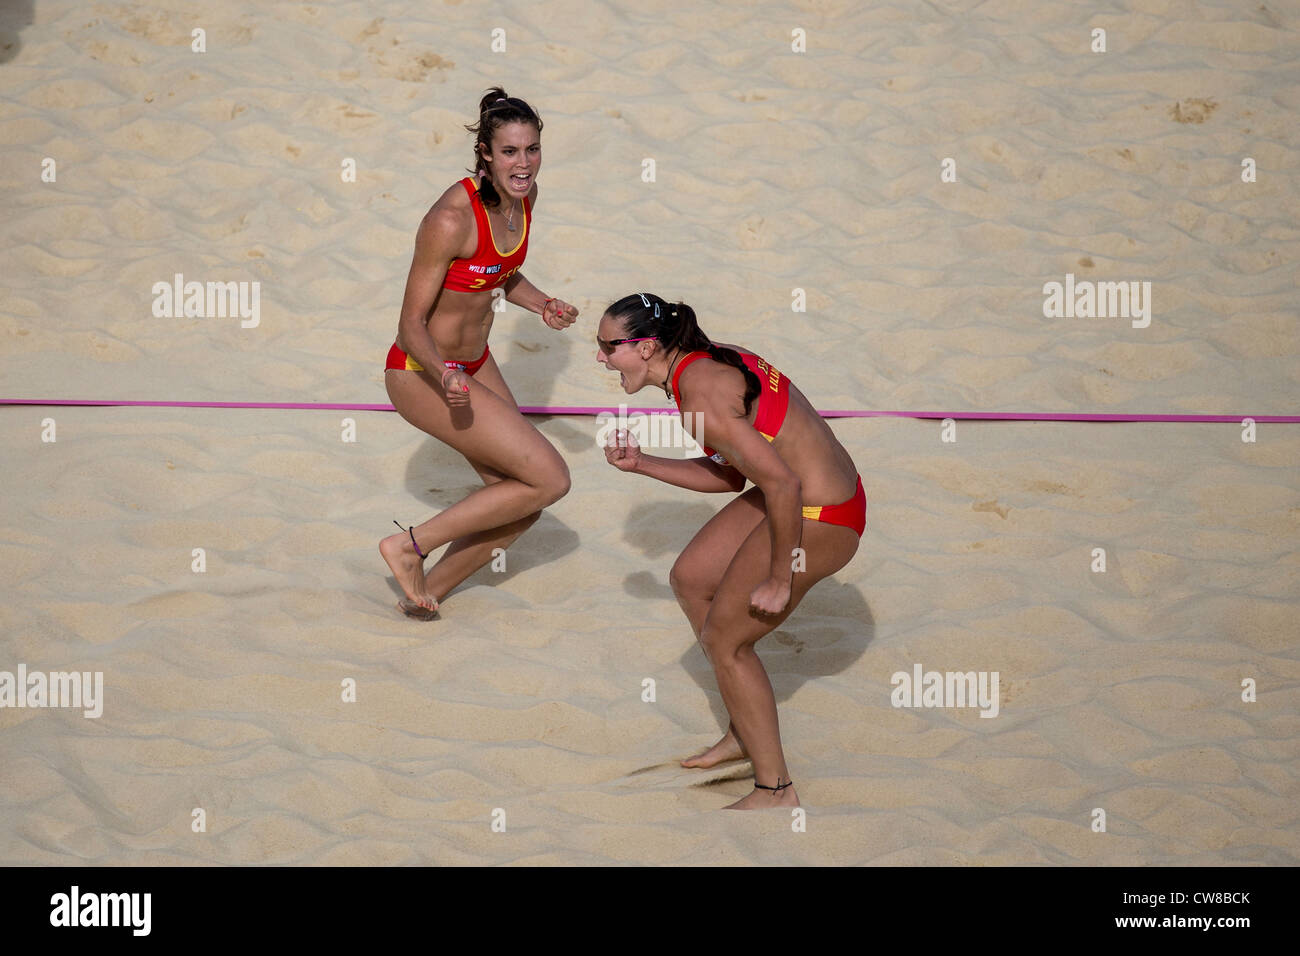 Liliana Fernandez Steiner and Elsa Baquerizo McMillan (ESP) competing  against Jennifer Kessy (USA) in Beach Volleyball at the Ol Stock Photo -  Alamy